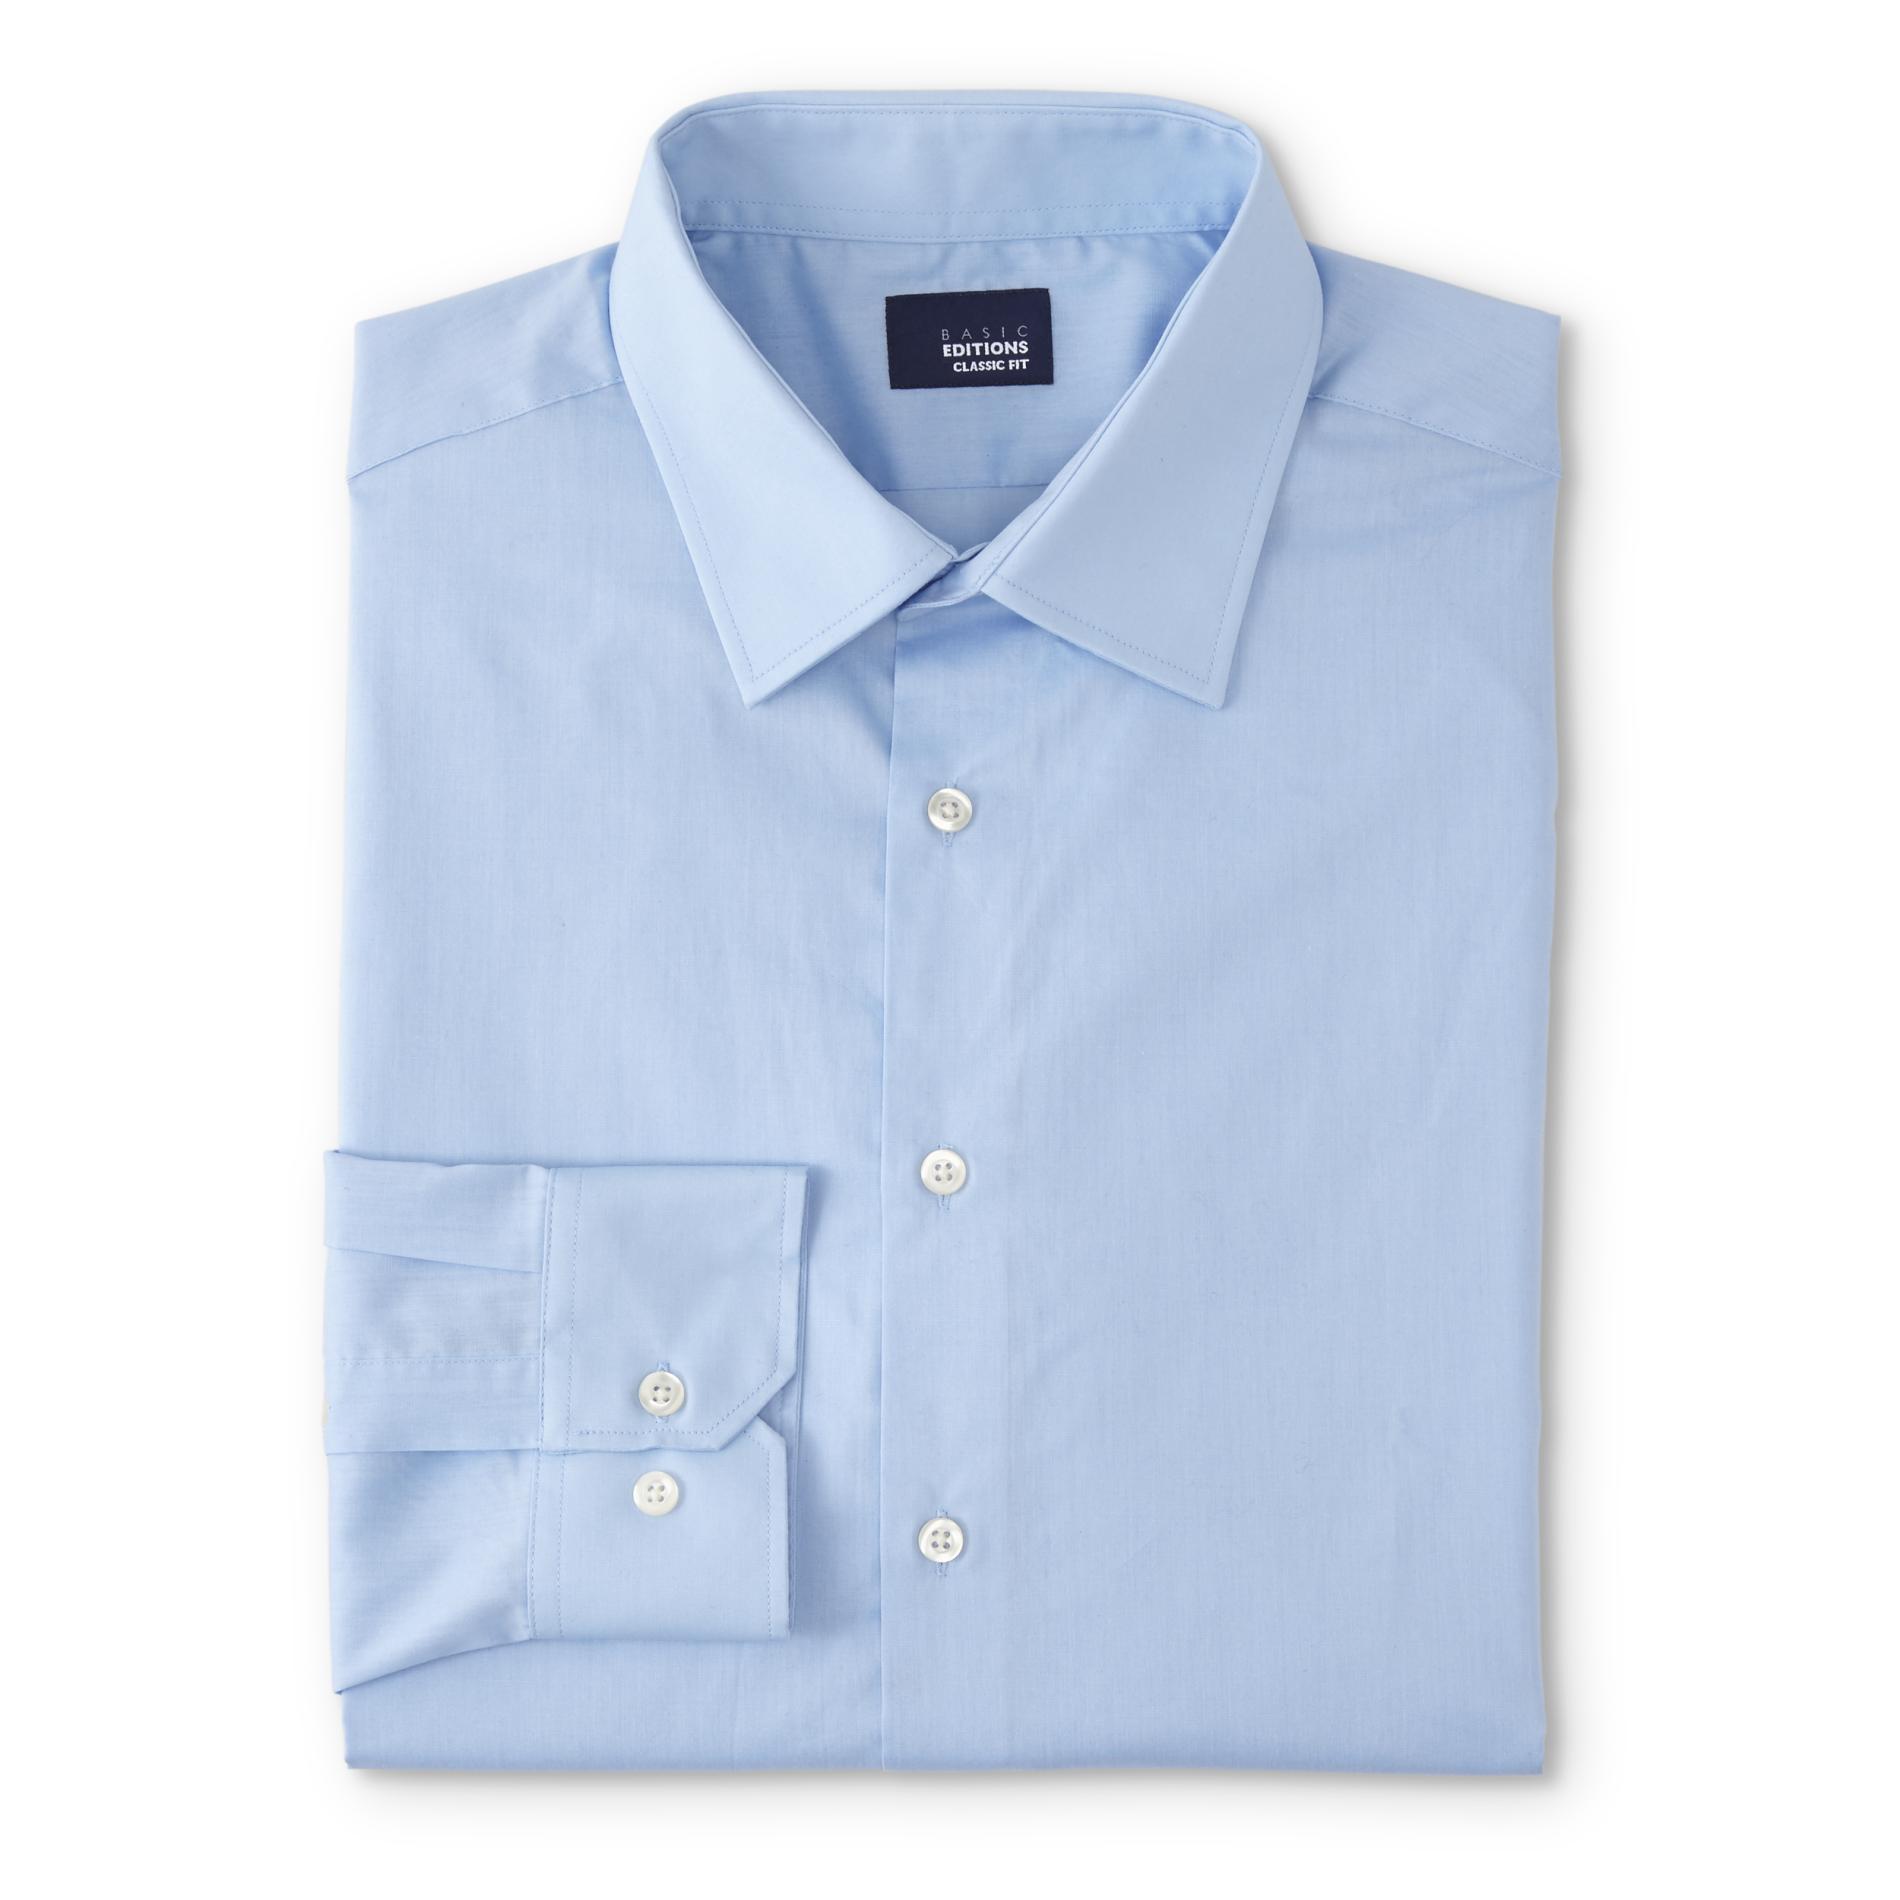 Basic Editions Men's Classic Fit Button-Front Shirt